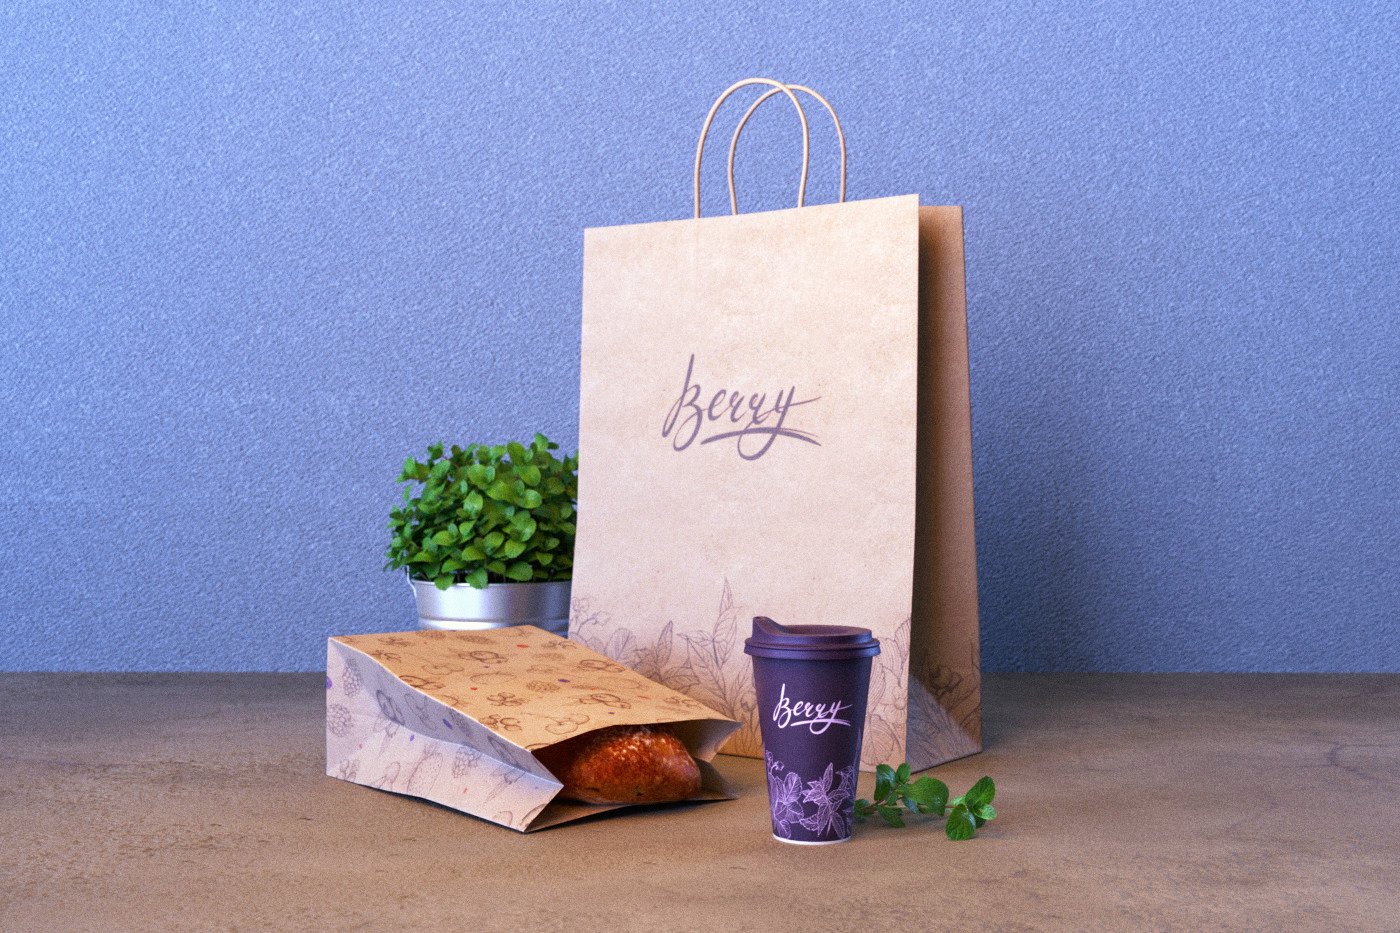 Berry - Example on Bag, coffe cup